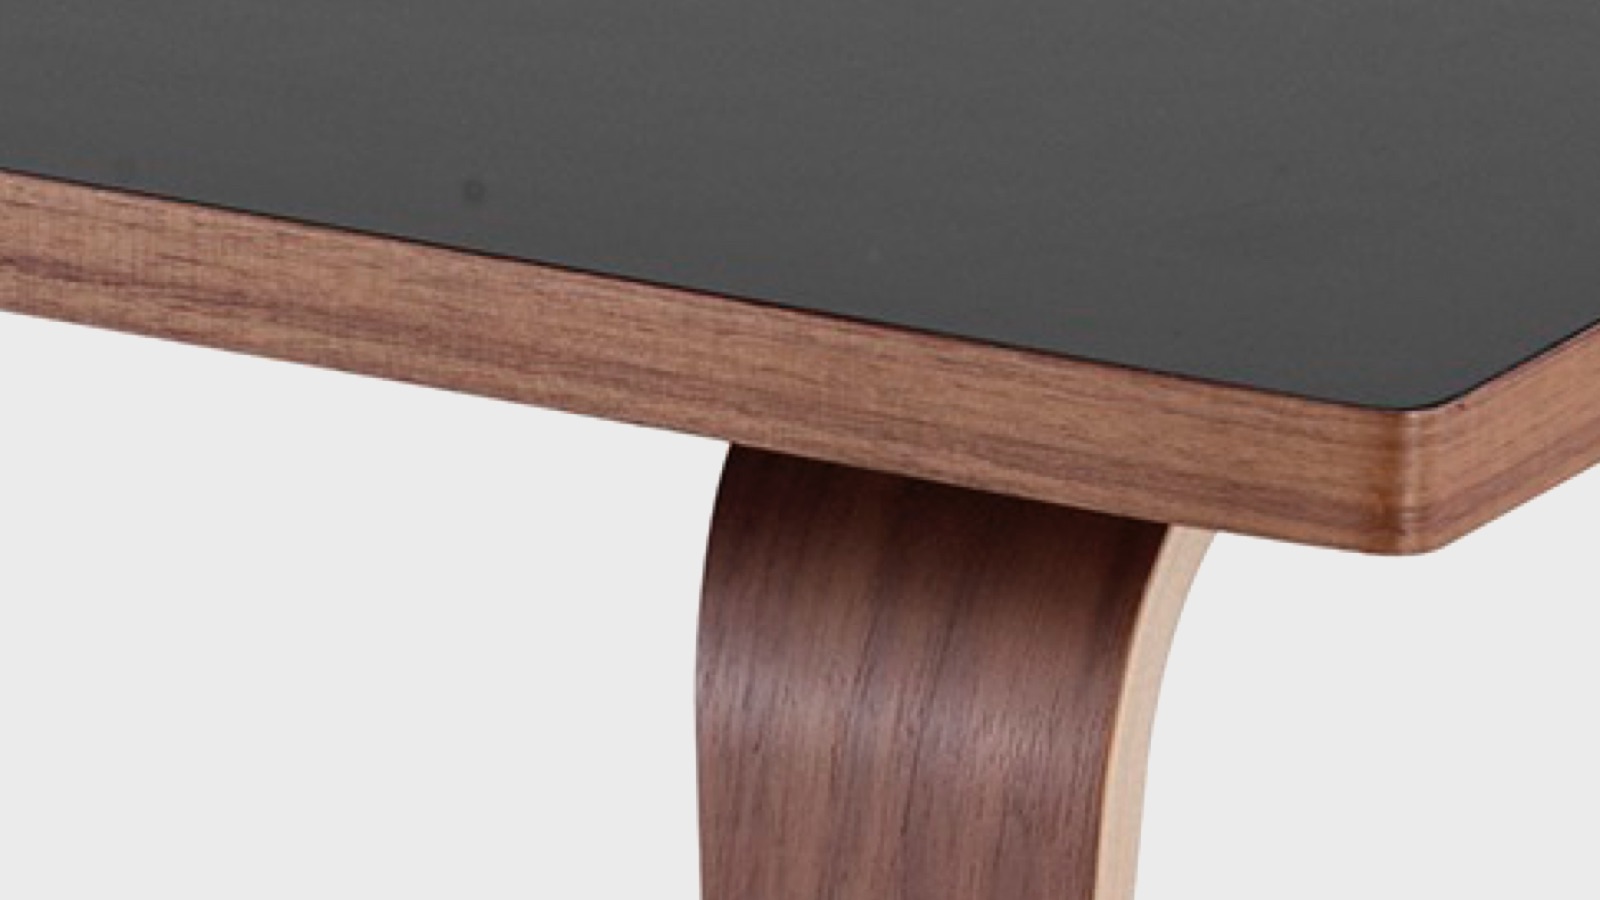 A close-up of the black laminate on top of a coffee table with walnut wood top and molded plywood legs.